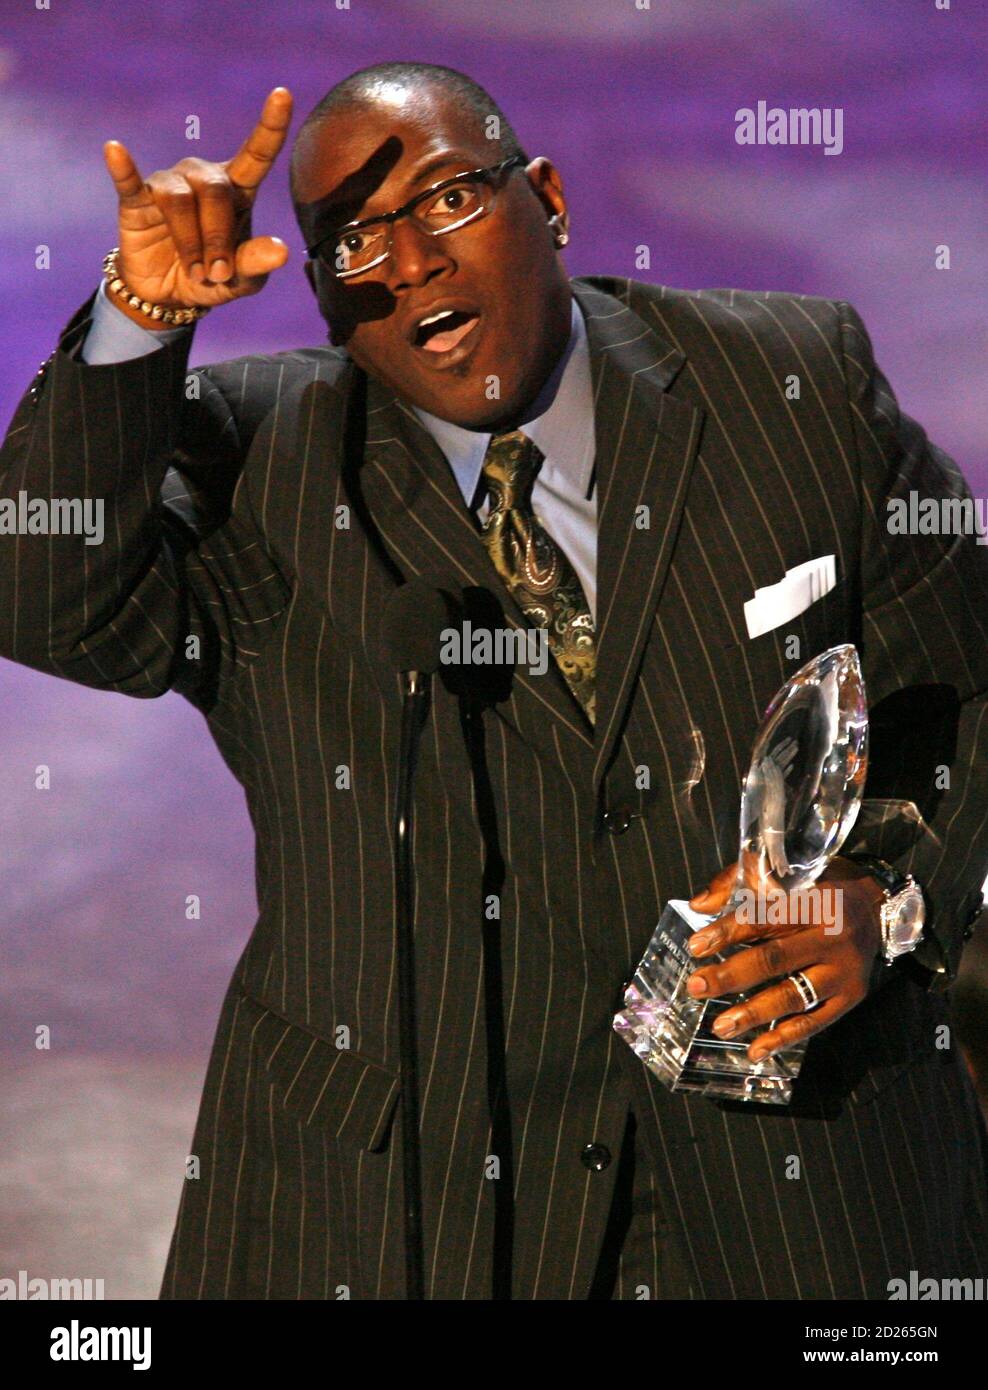 Randy Jackson accepts the award for favorite competition/reality show for 'American Idol' at the 33rd annual People's Choice Awards in Los Angeles, California January 9, 2007.   REUTERS/Mike Blake  (UNITED STATES) Stock Photo